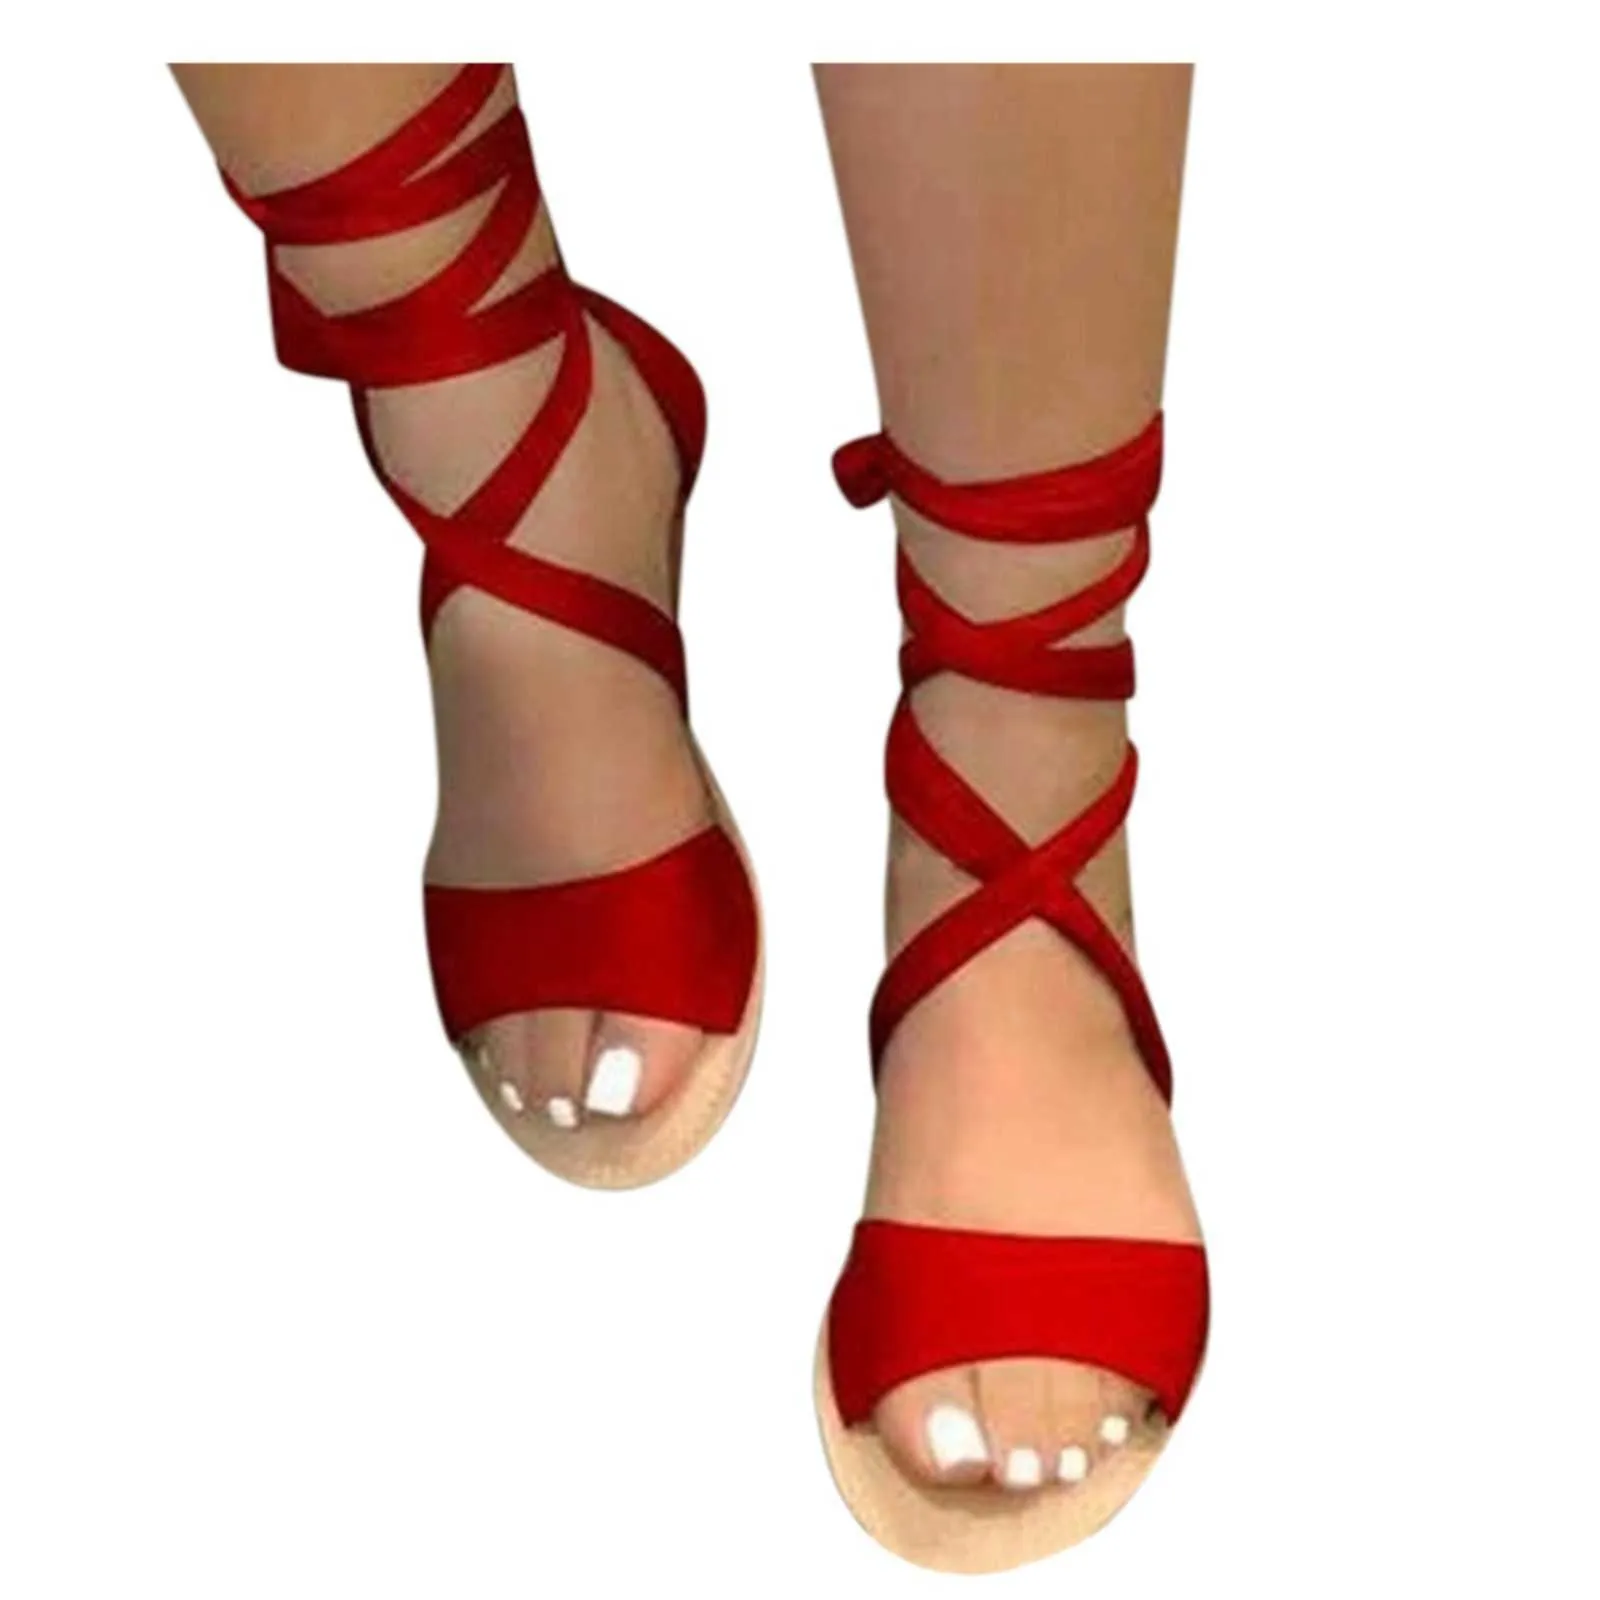 2021 New Women Gladiator Shoes Summer Sandals Buckle Strap Hollow Out Beach Cool Women's Ladies Flat Footwear Y0721